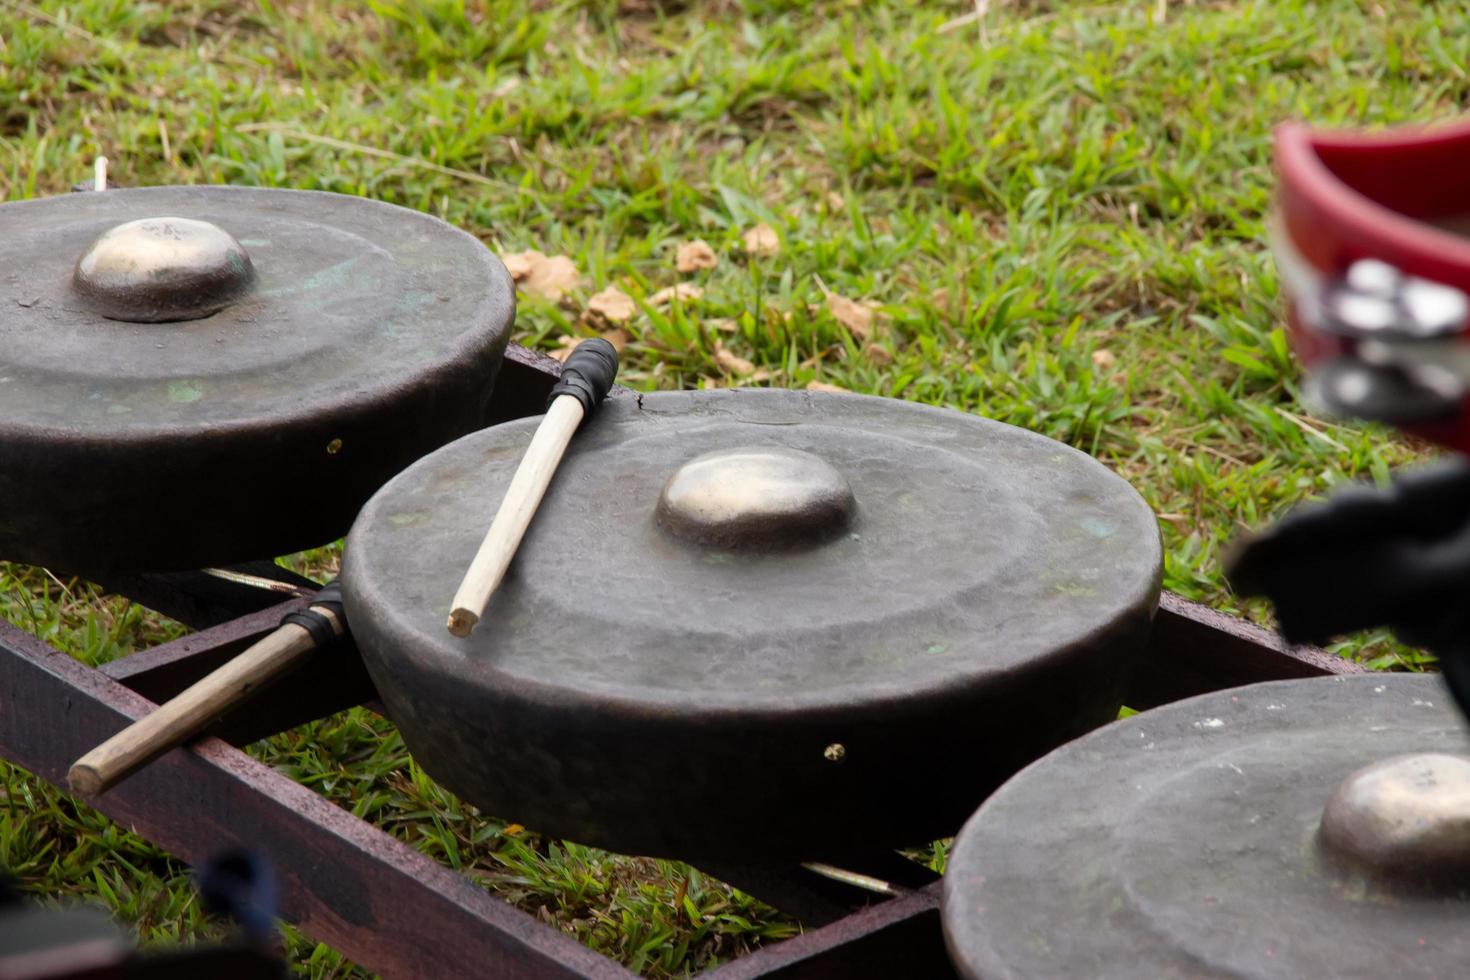 gamelan on a green grass background at a celebration event photo